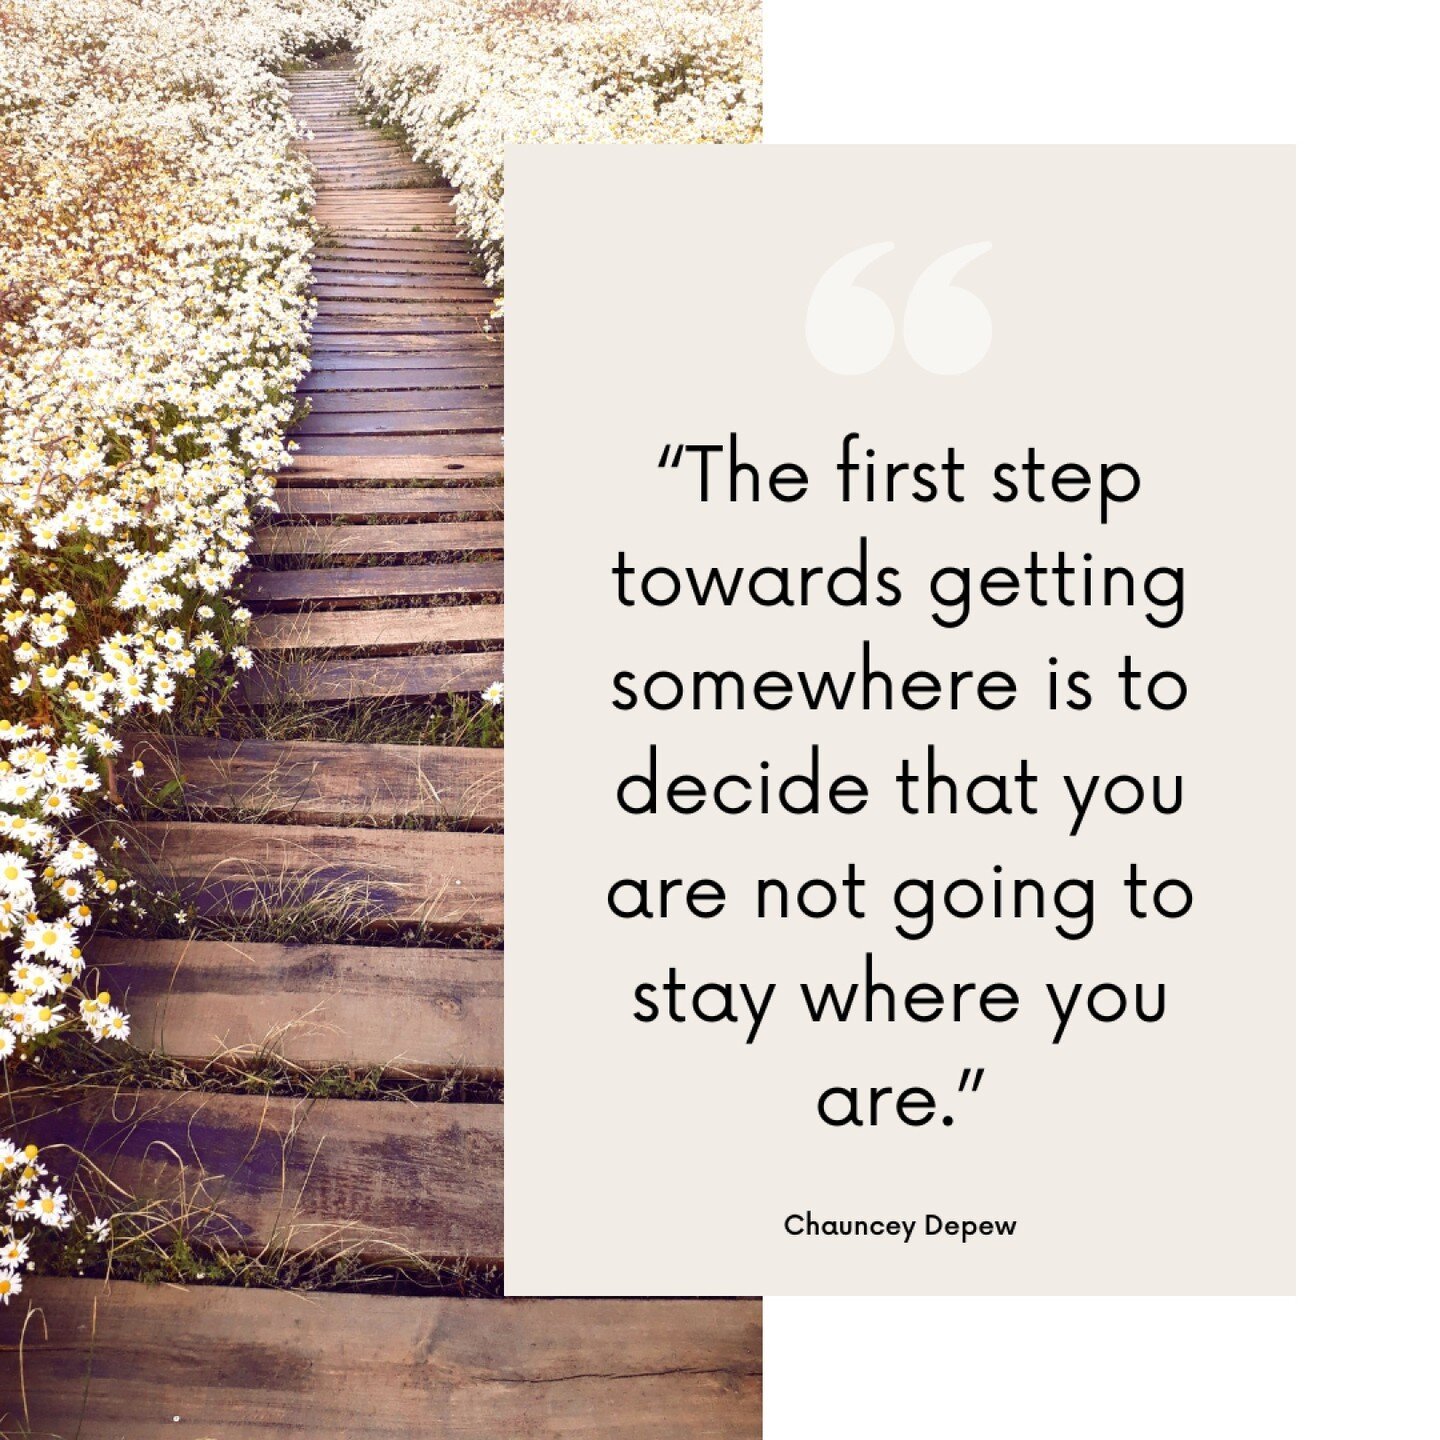 Ever feel stuck in the chaos of clutter, not knowing where to start? It happens to the best of us. 

But here's the deal &ndash; the first step towards getting somewhere is deciding not to stay where you are. That's where you come in, taking charge o